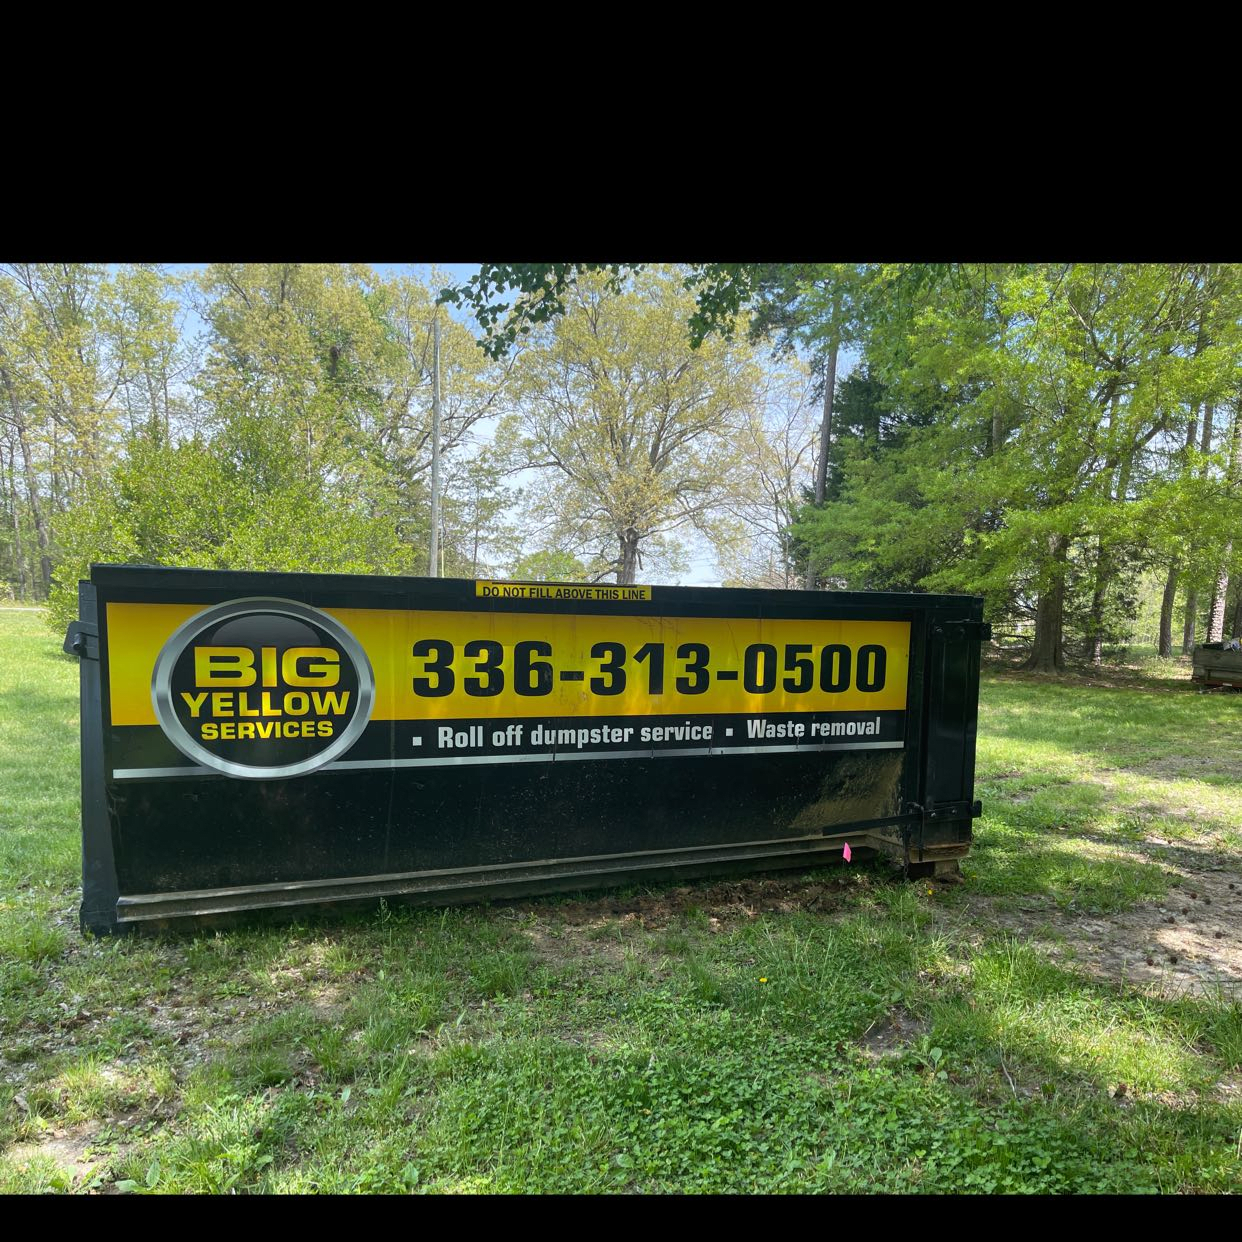 Dumpster Rental 1820 Gerringer Road Elon, NC 27244 Terms of Use | Roll-Off Dumpster and Portable Toilet Rentals | Big Yellow Services, LLC